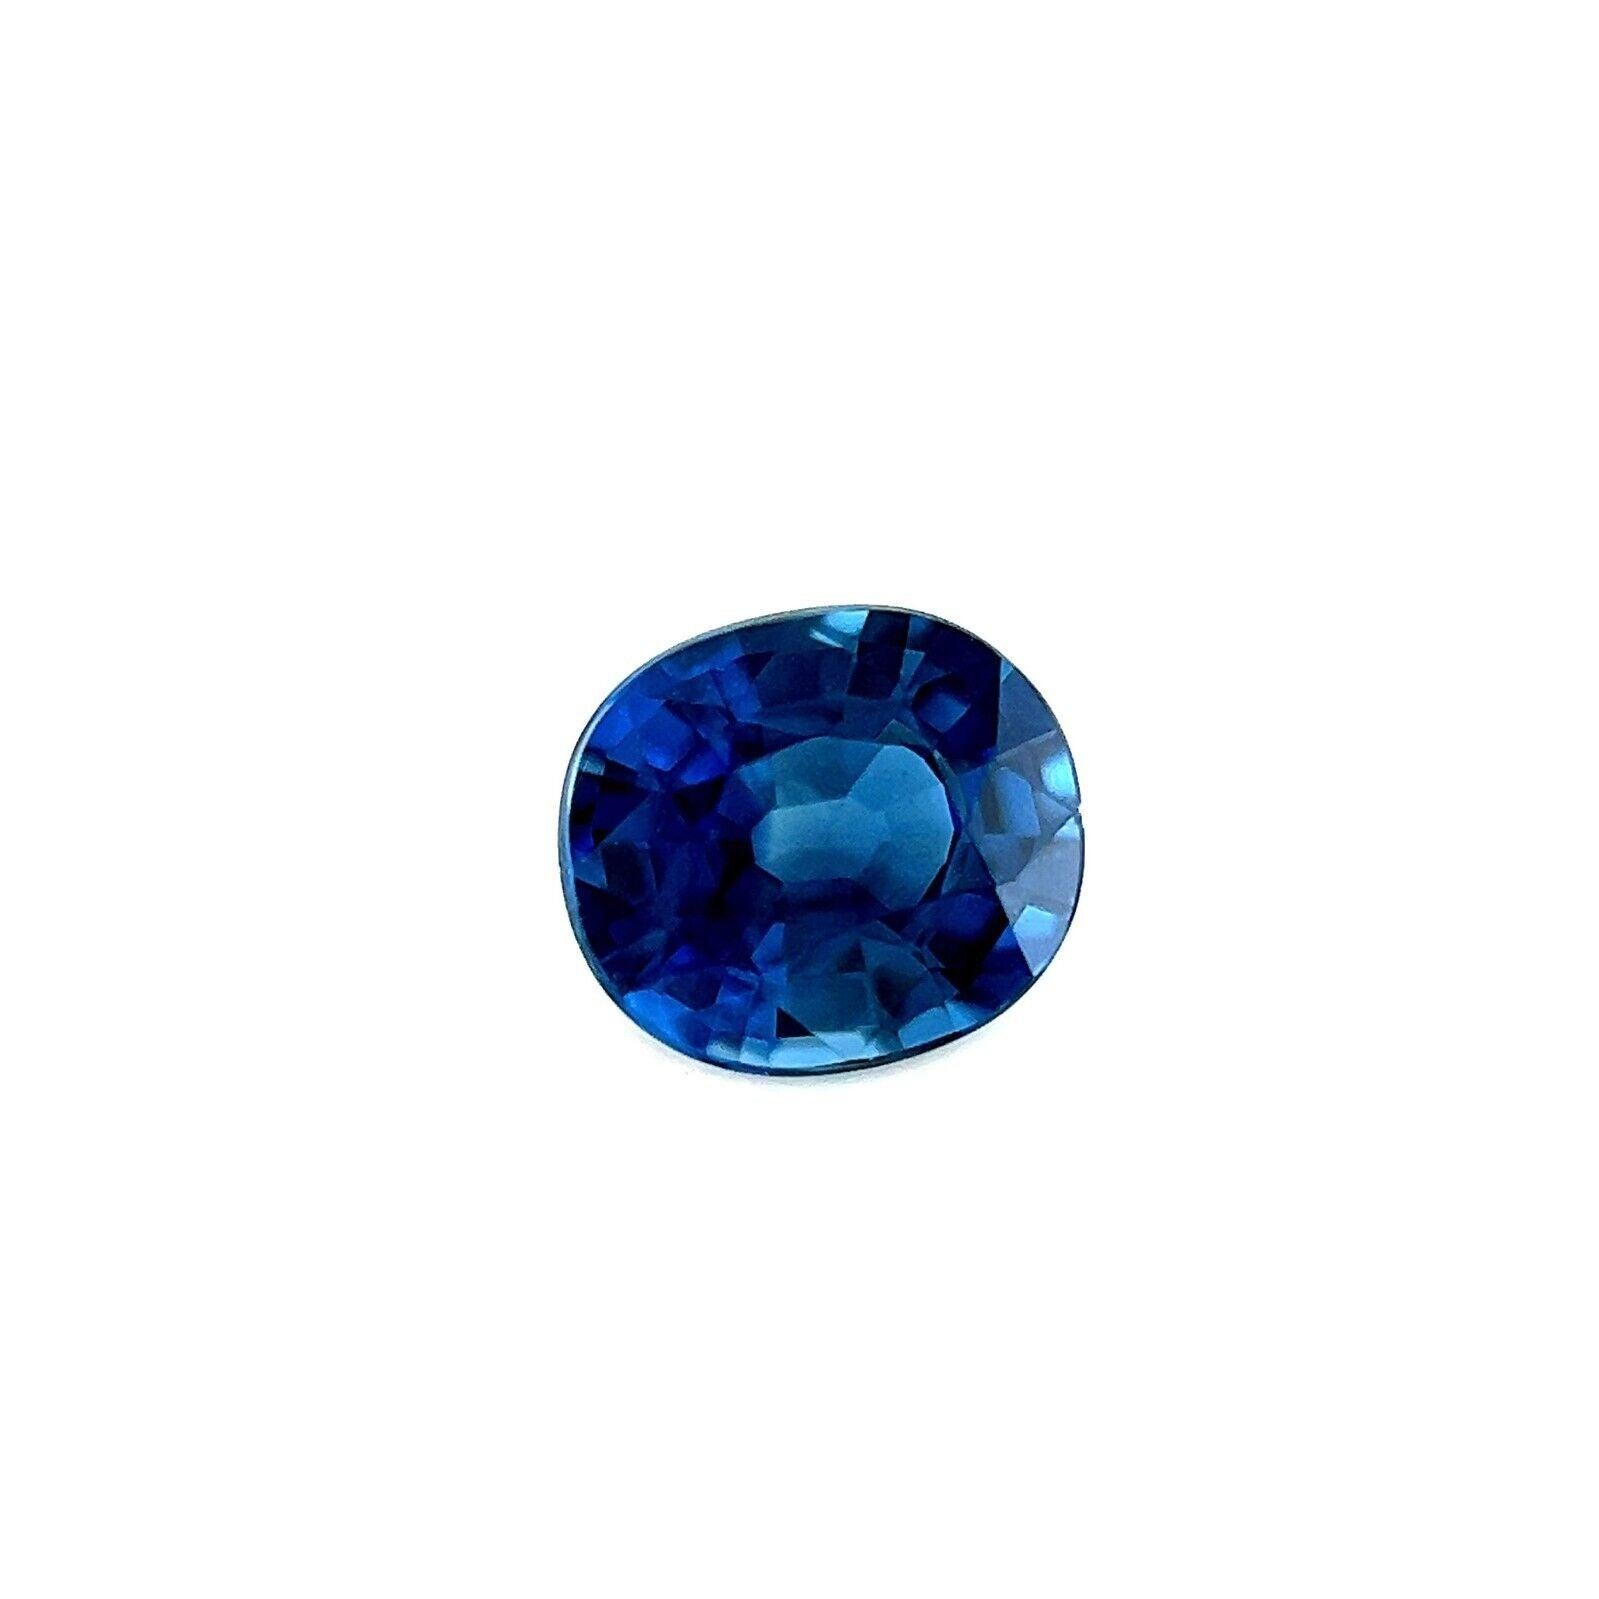 Natural Australian Blue Sapphire 0.49ct Oval Cut Loose Gem 4.7x4.2mm

Natural Australian Blue Sapphire Gemstone.
0.49 Carat with a deep blue colour and very good clarity. Only some small natural inclusions visible when looking closely. Also has a